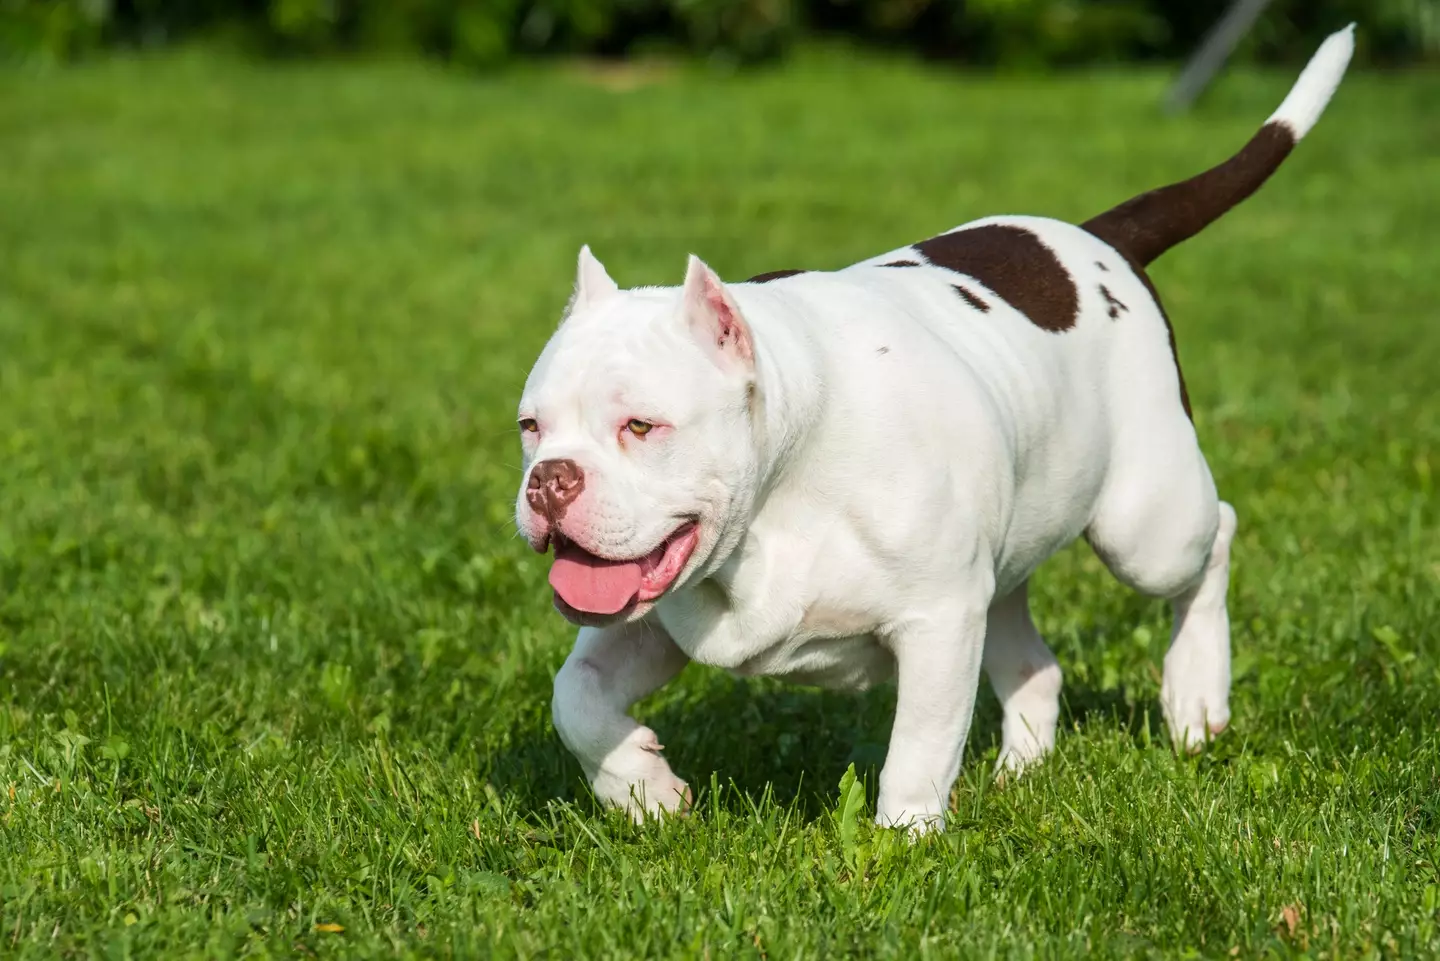 XL bullys will be banned by the end of the year.